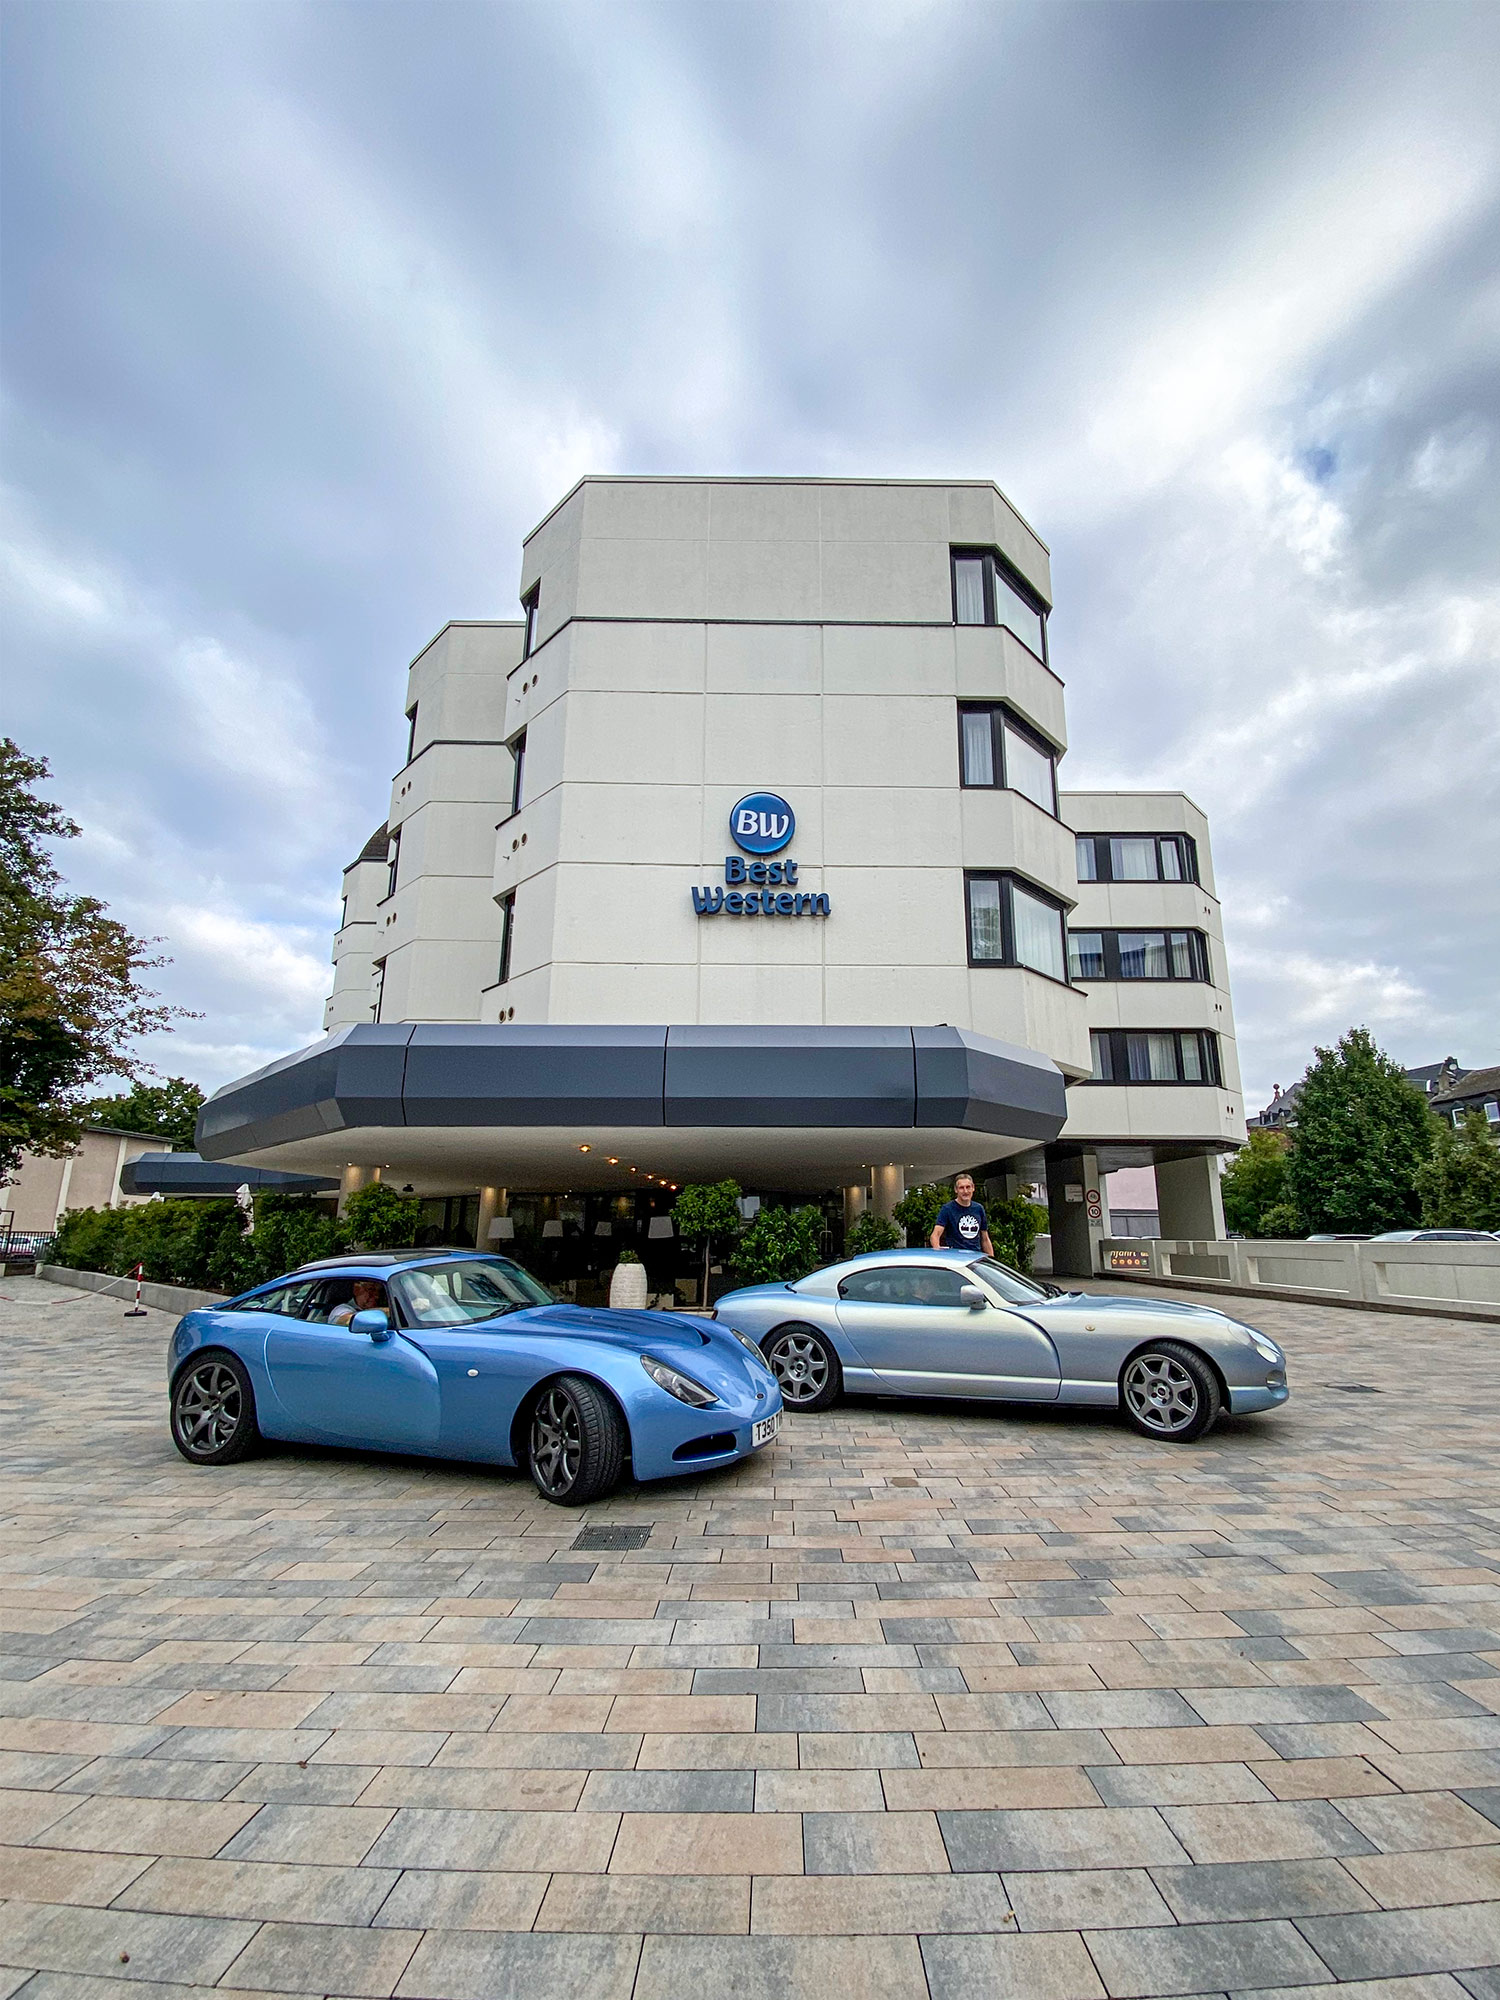 Trier Best Western Hotel Germany with TVRs